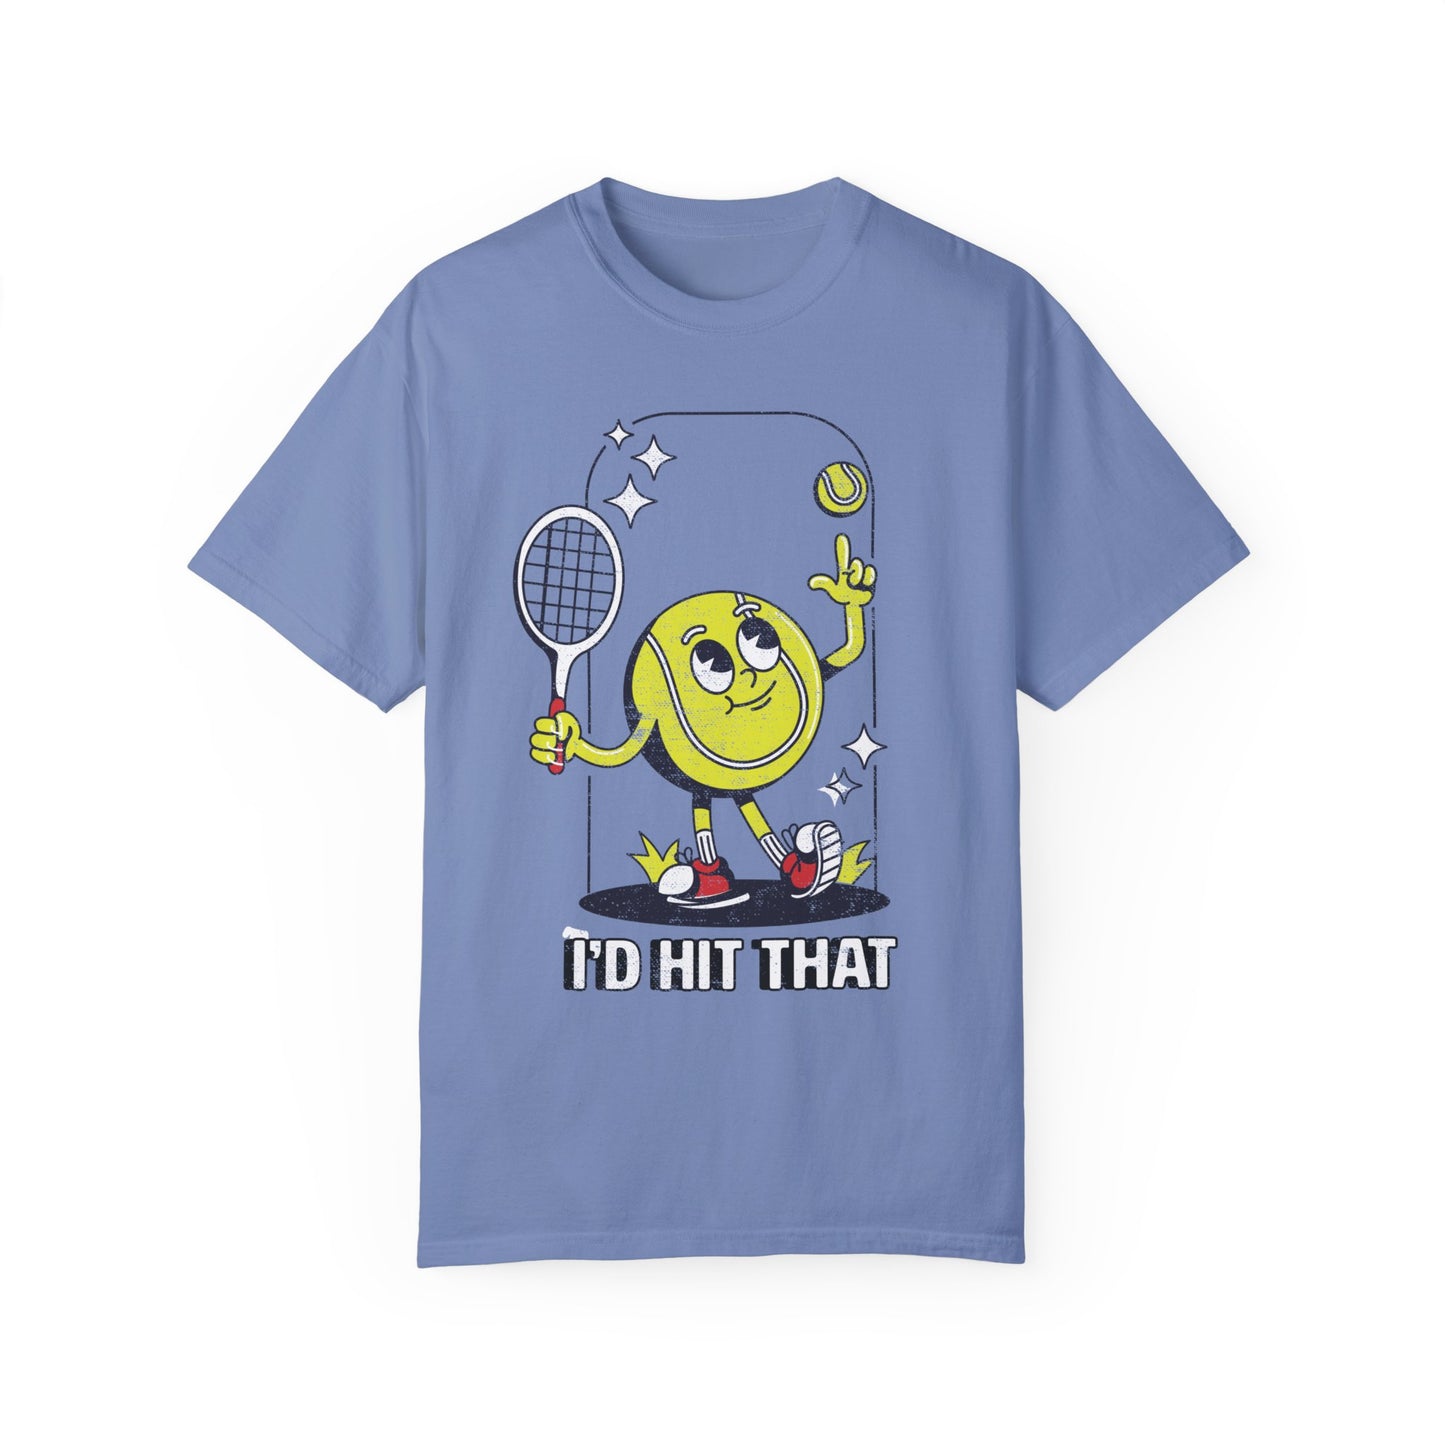 Funny Tennis Shirt | Funny Graphic T-Shirt | Tennis Tee | Comfort Colors | Tennis Lover Gift